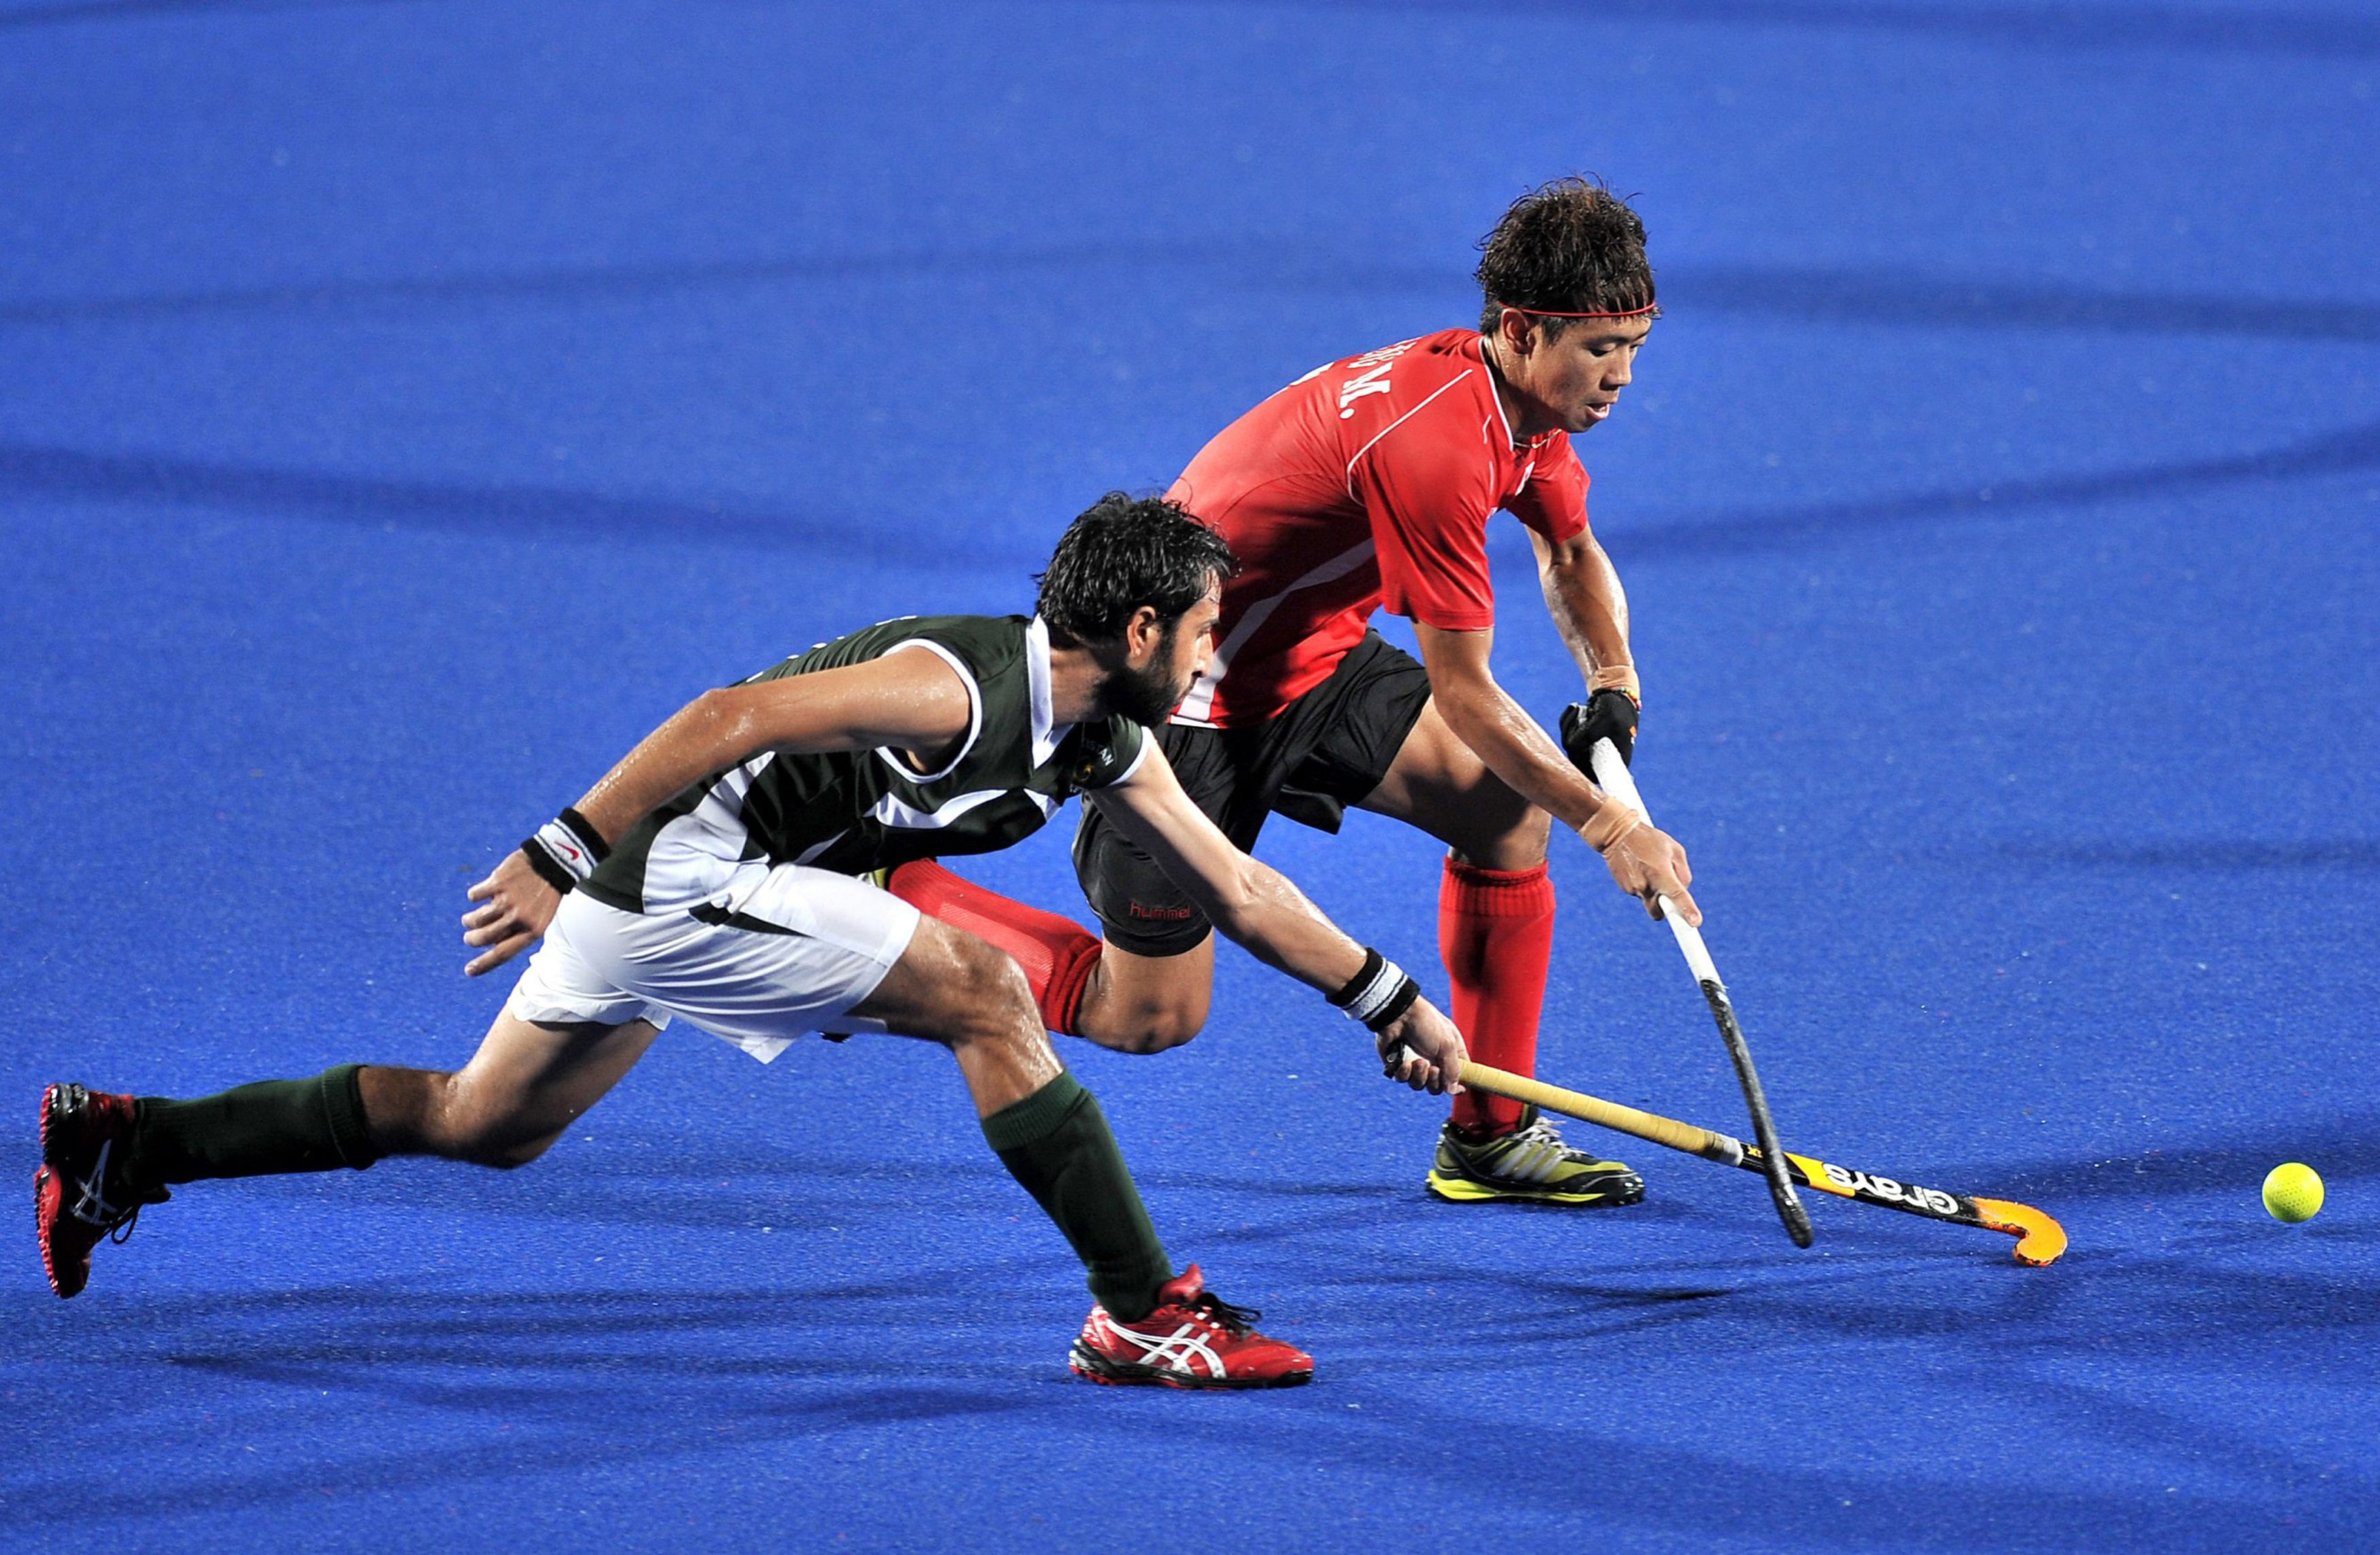 pakistan 039 s abbasi shakeel l and south korea 039 s jang jong hyun r fight for the ball during their semi final match at the asia cup field hockey 2013 tournament in ipoh on august 30 2013 photo afp